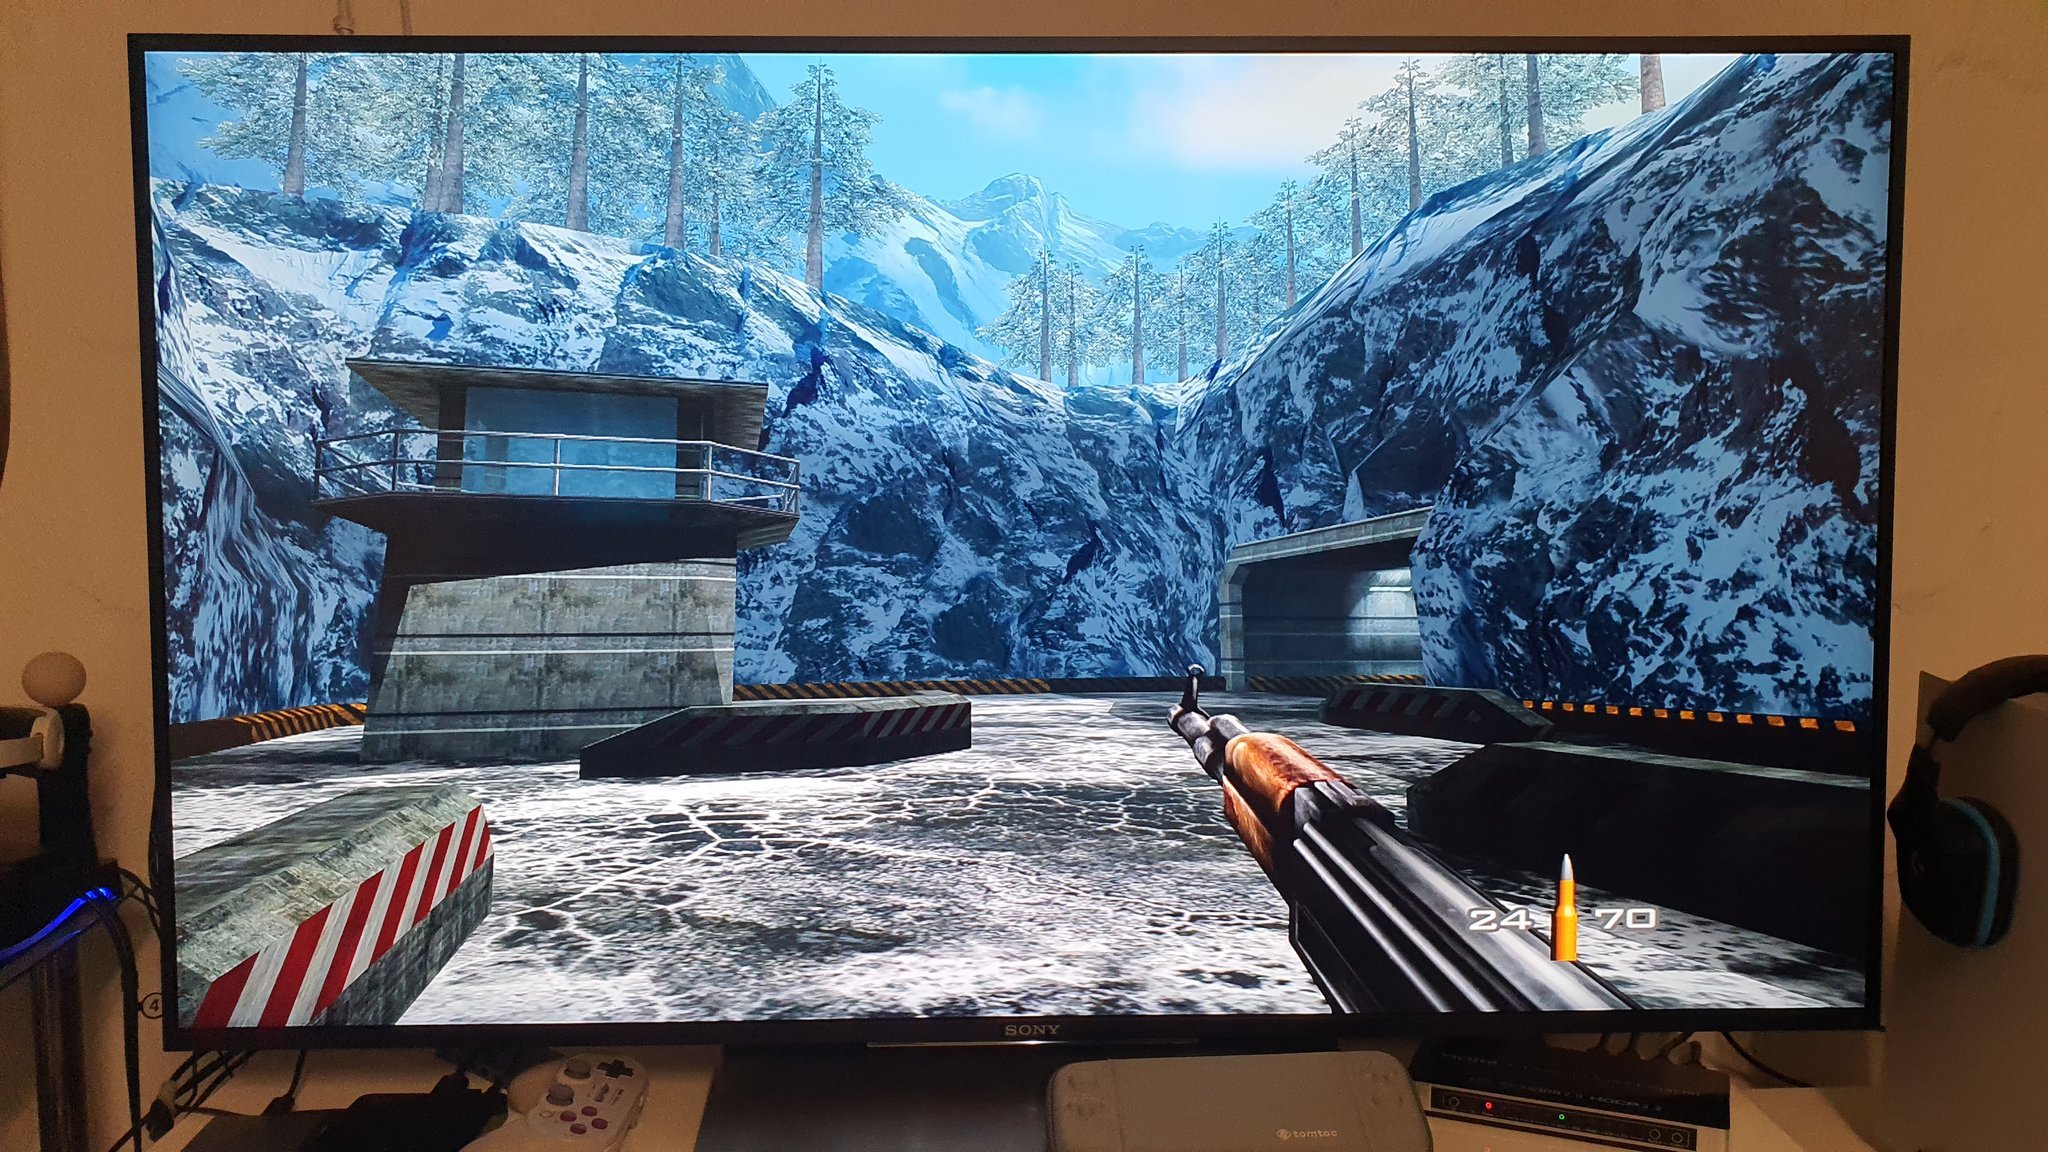 GoldenEye’s Xbox remaster leaked online – and it’s fully playable on a PC